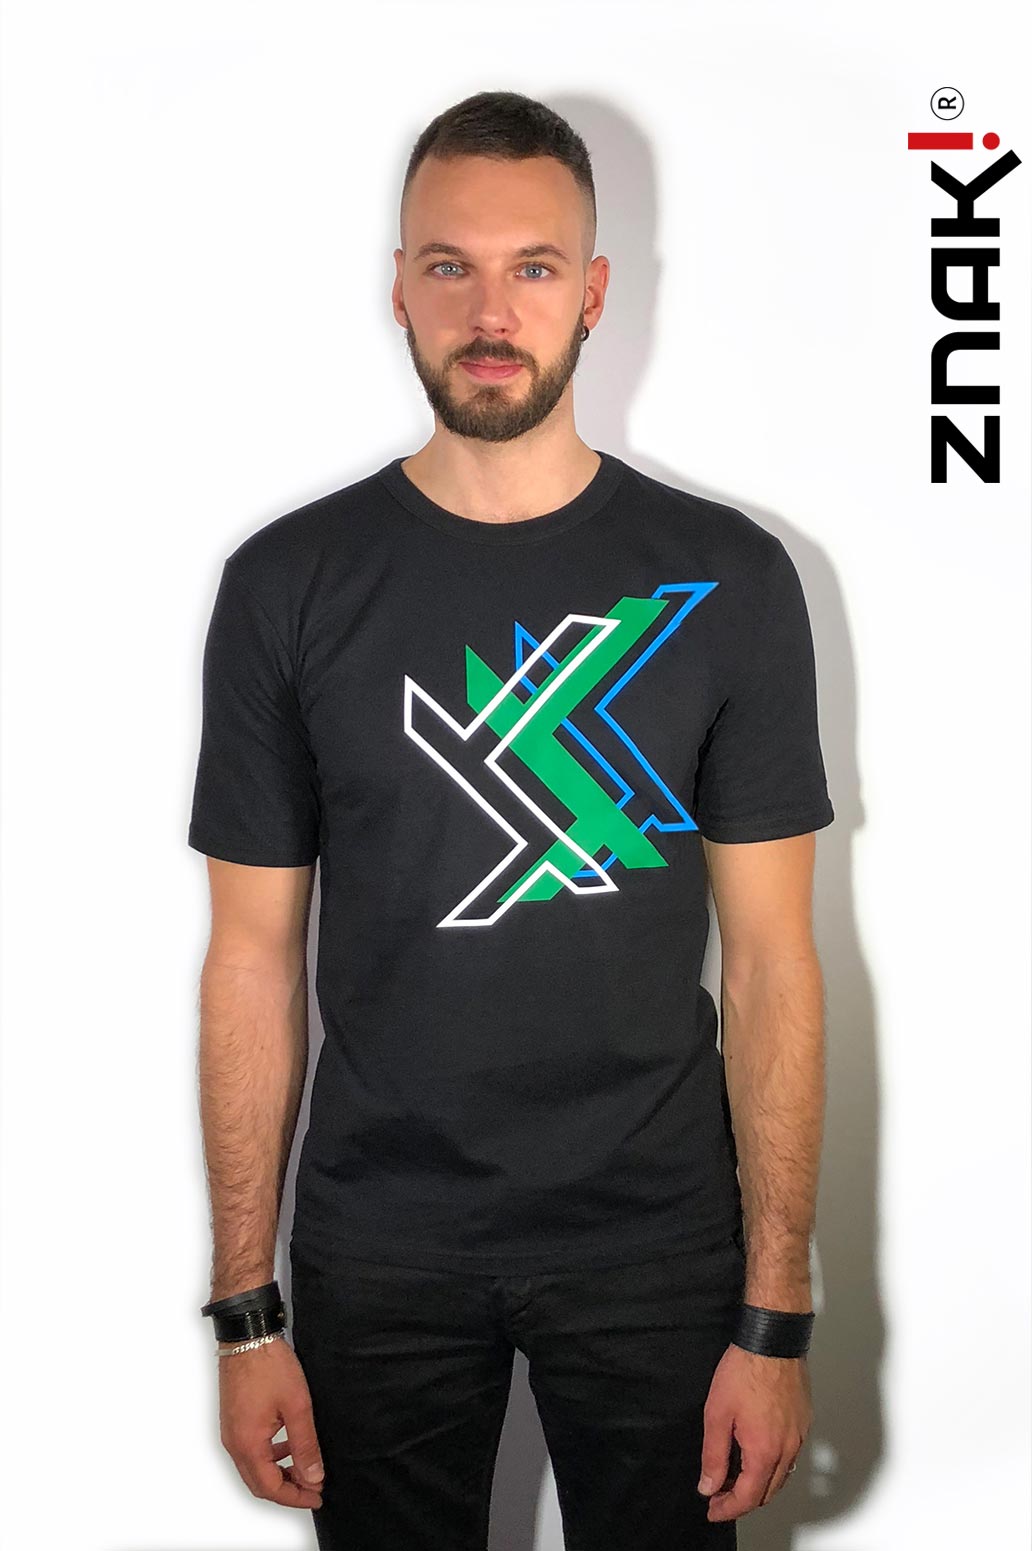 SEQUENCE-znak-tshirts-madeinitaly